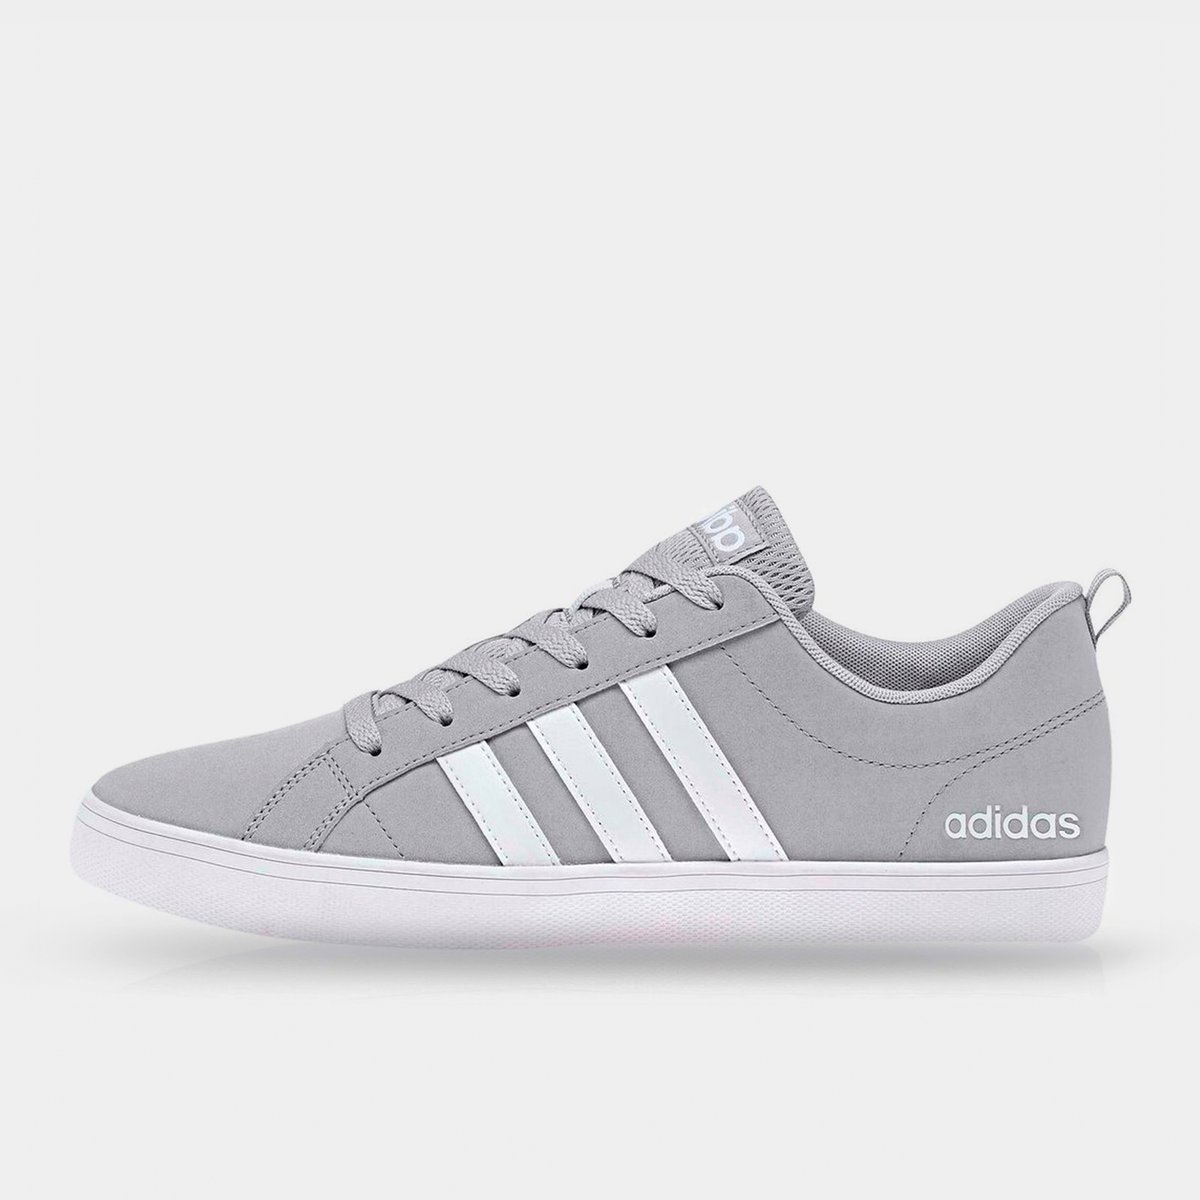 adidas vs pace trainers grey